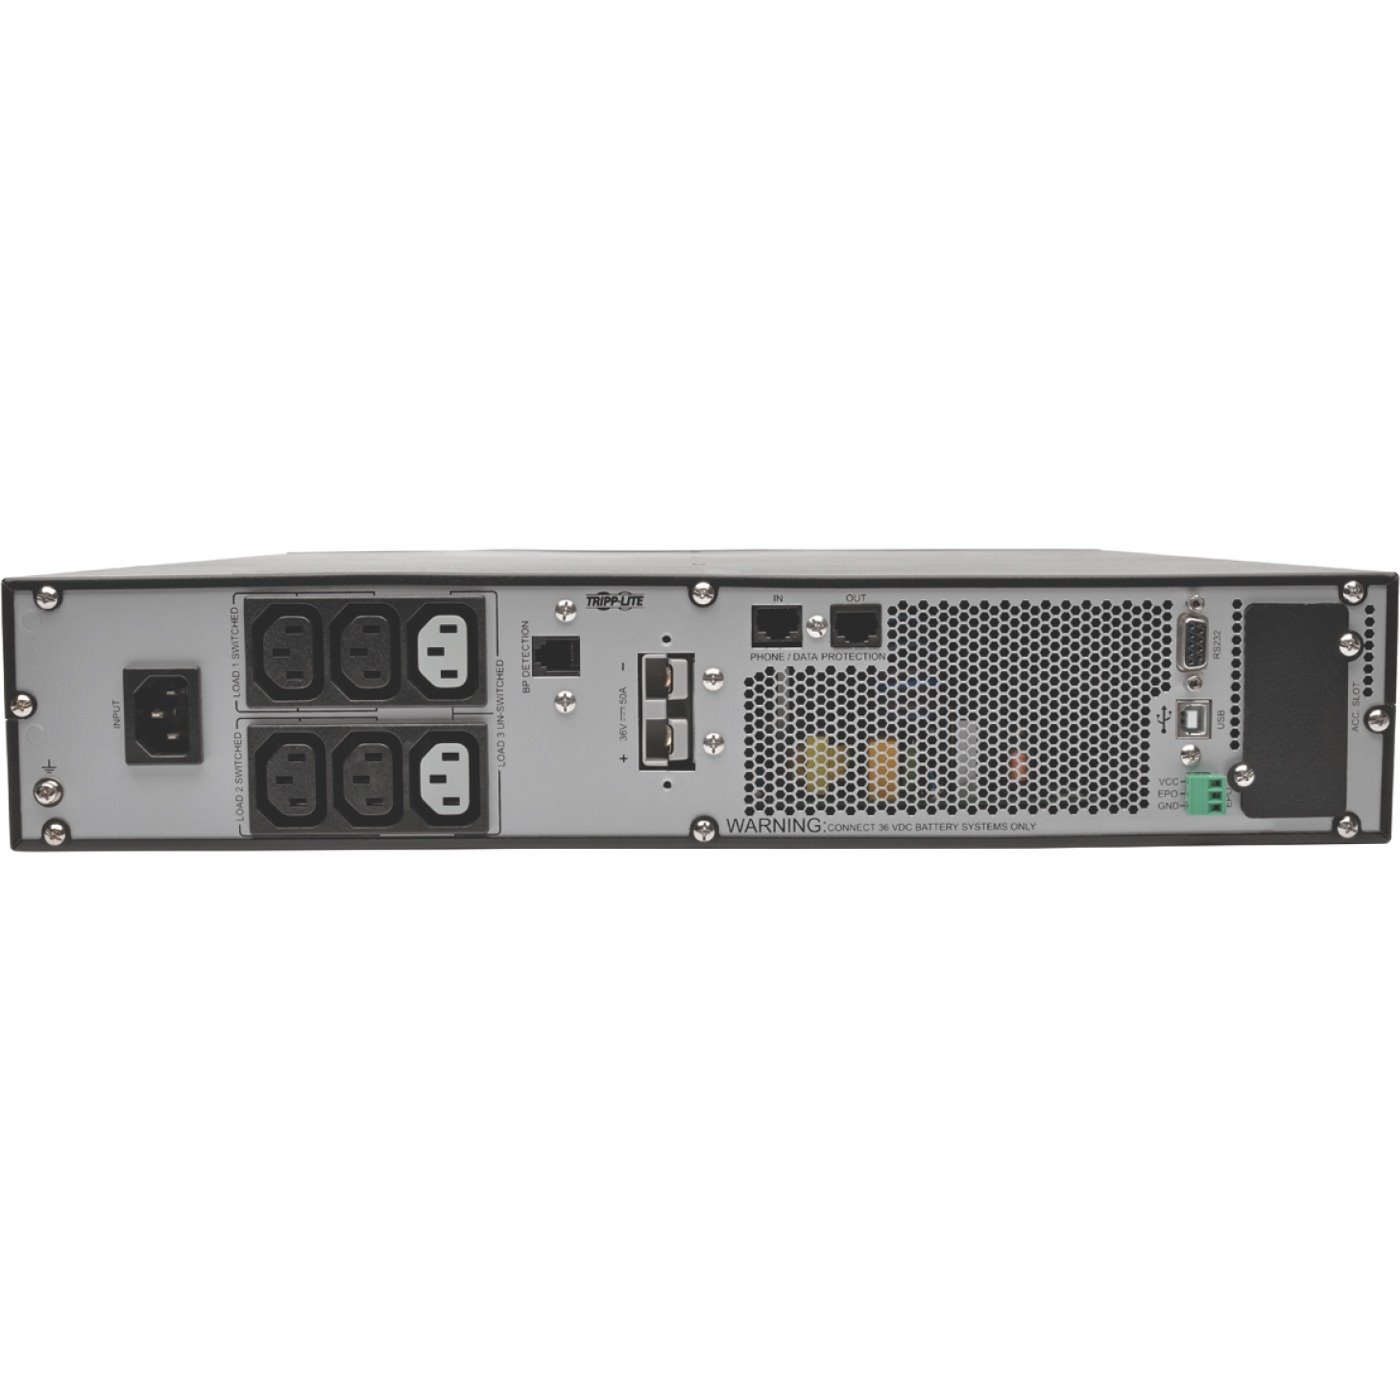 Eaton Tripp Lite Series SmartOnline 1500VA 1350W 208/230V Double-Conversion UPS - 8 Outlets, Extended Run, Network Card Option, LCD, USB, DB9, 2U Rack/Tower - Battery Backup